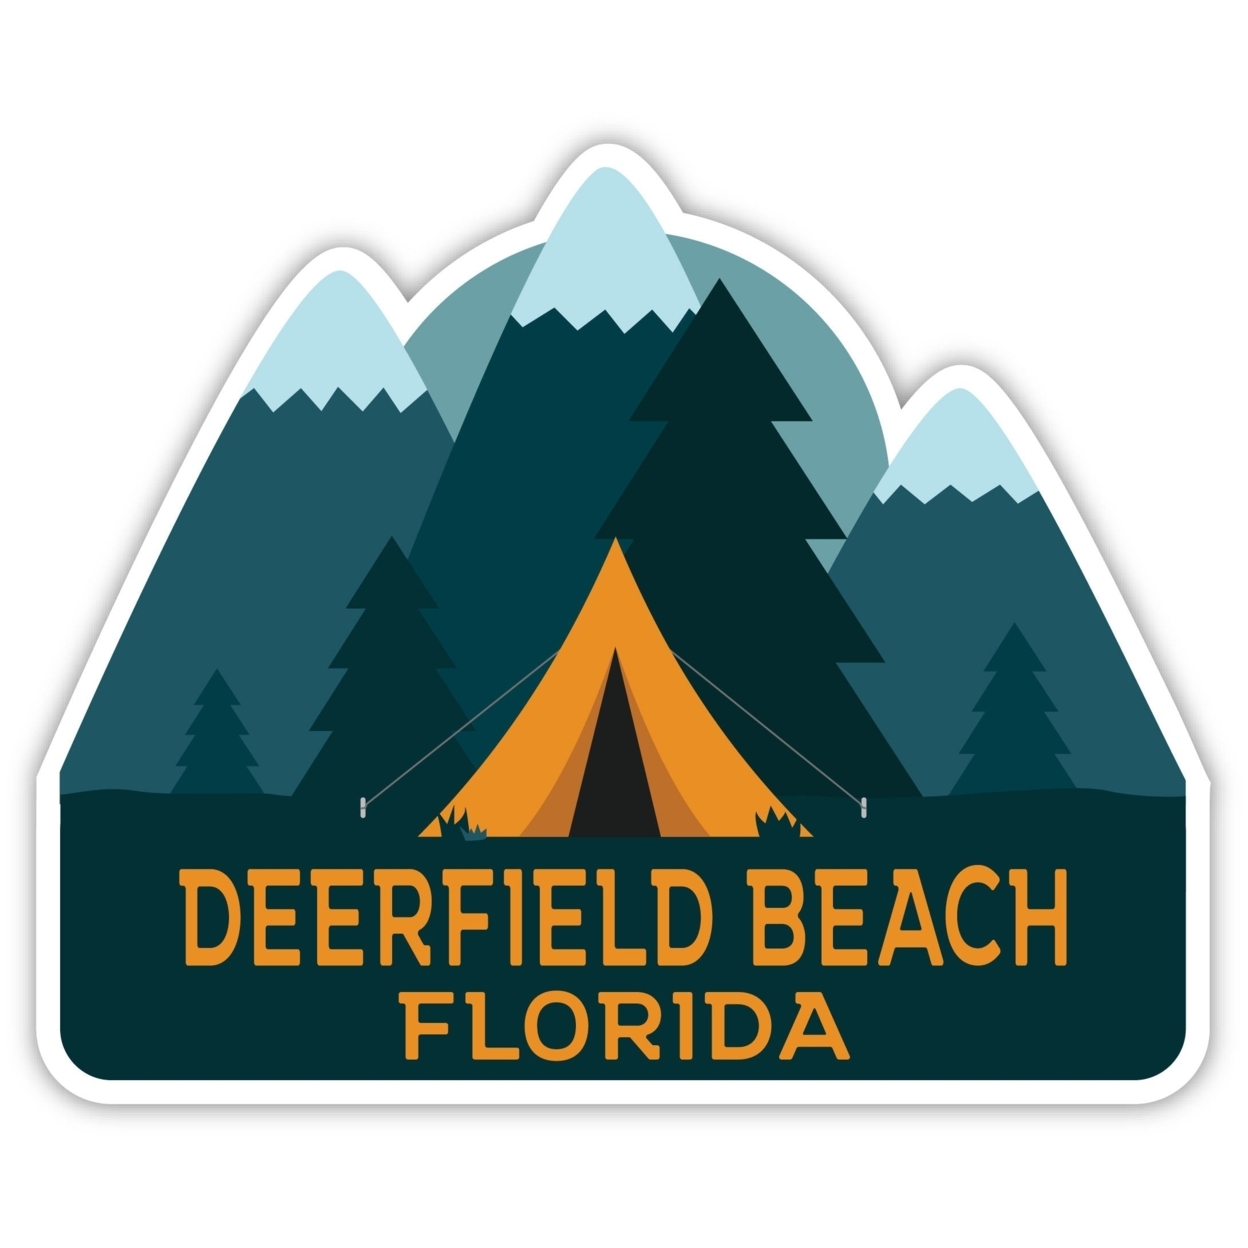 Deerfield Beach Florida Souvenir Decorative Stickers (Choose Theme And Size) - 4-Pack, 4-Inch, Tent